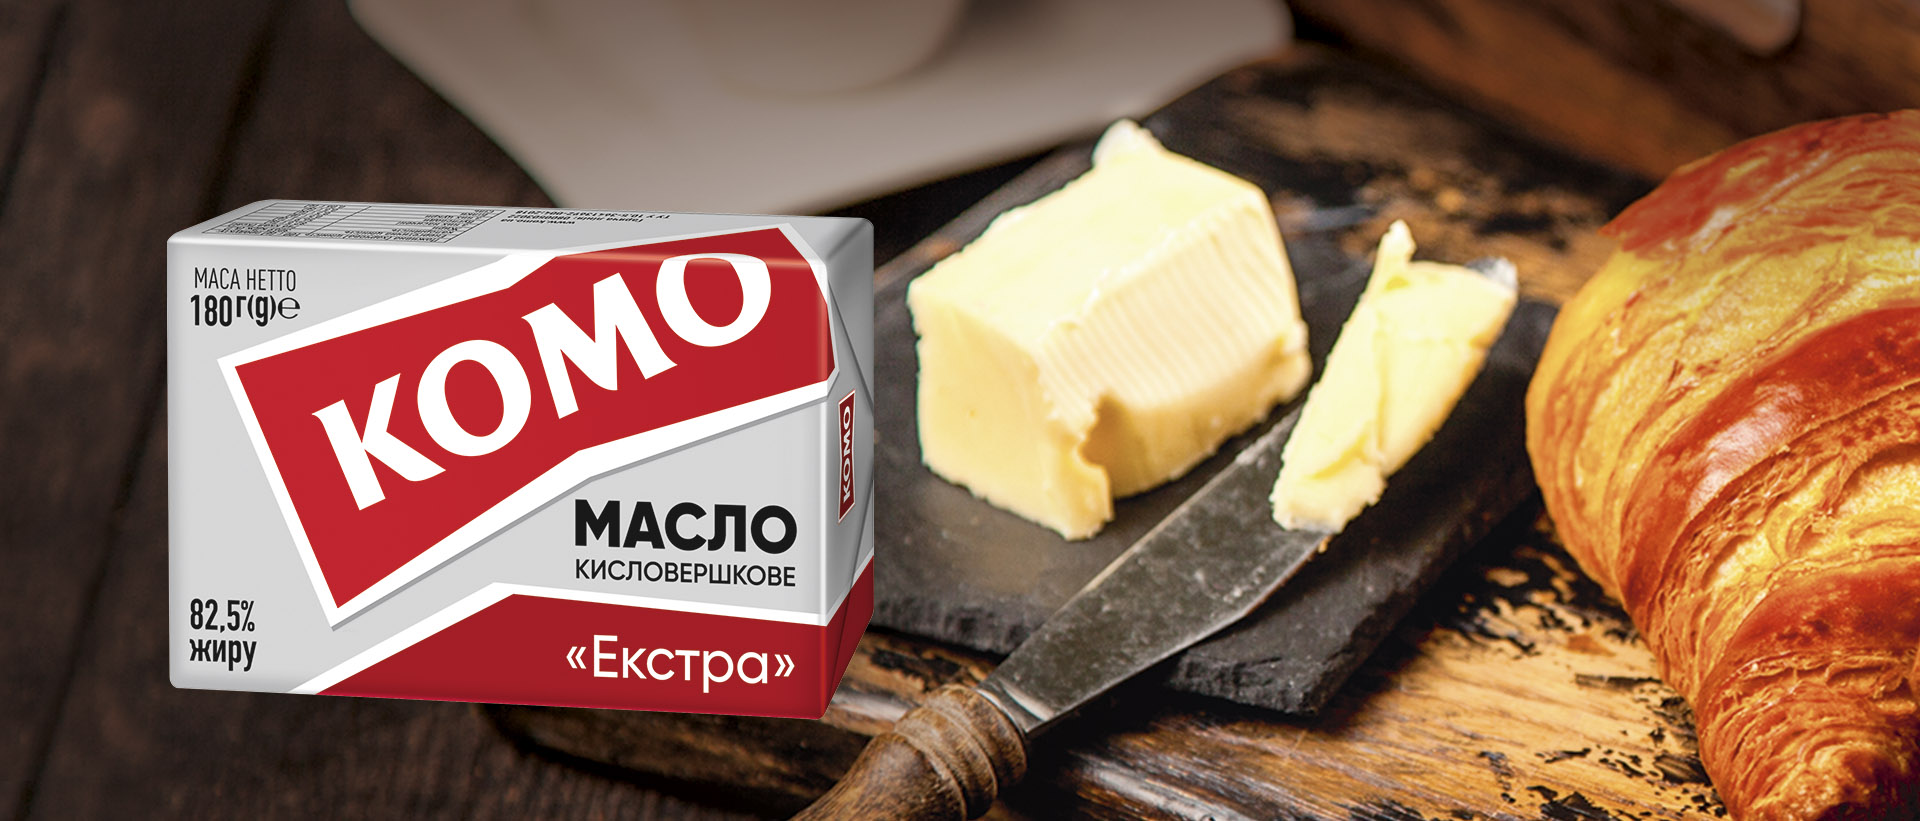 Масло «Екстра» 